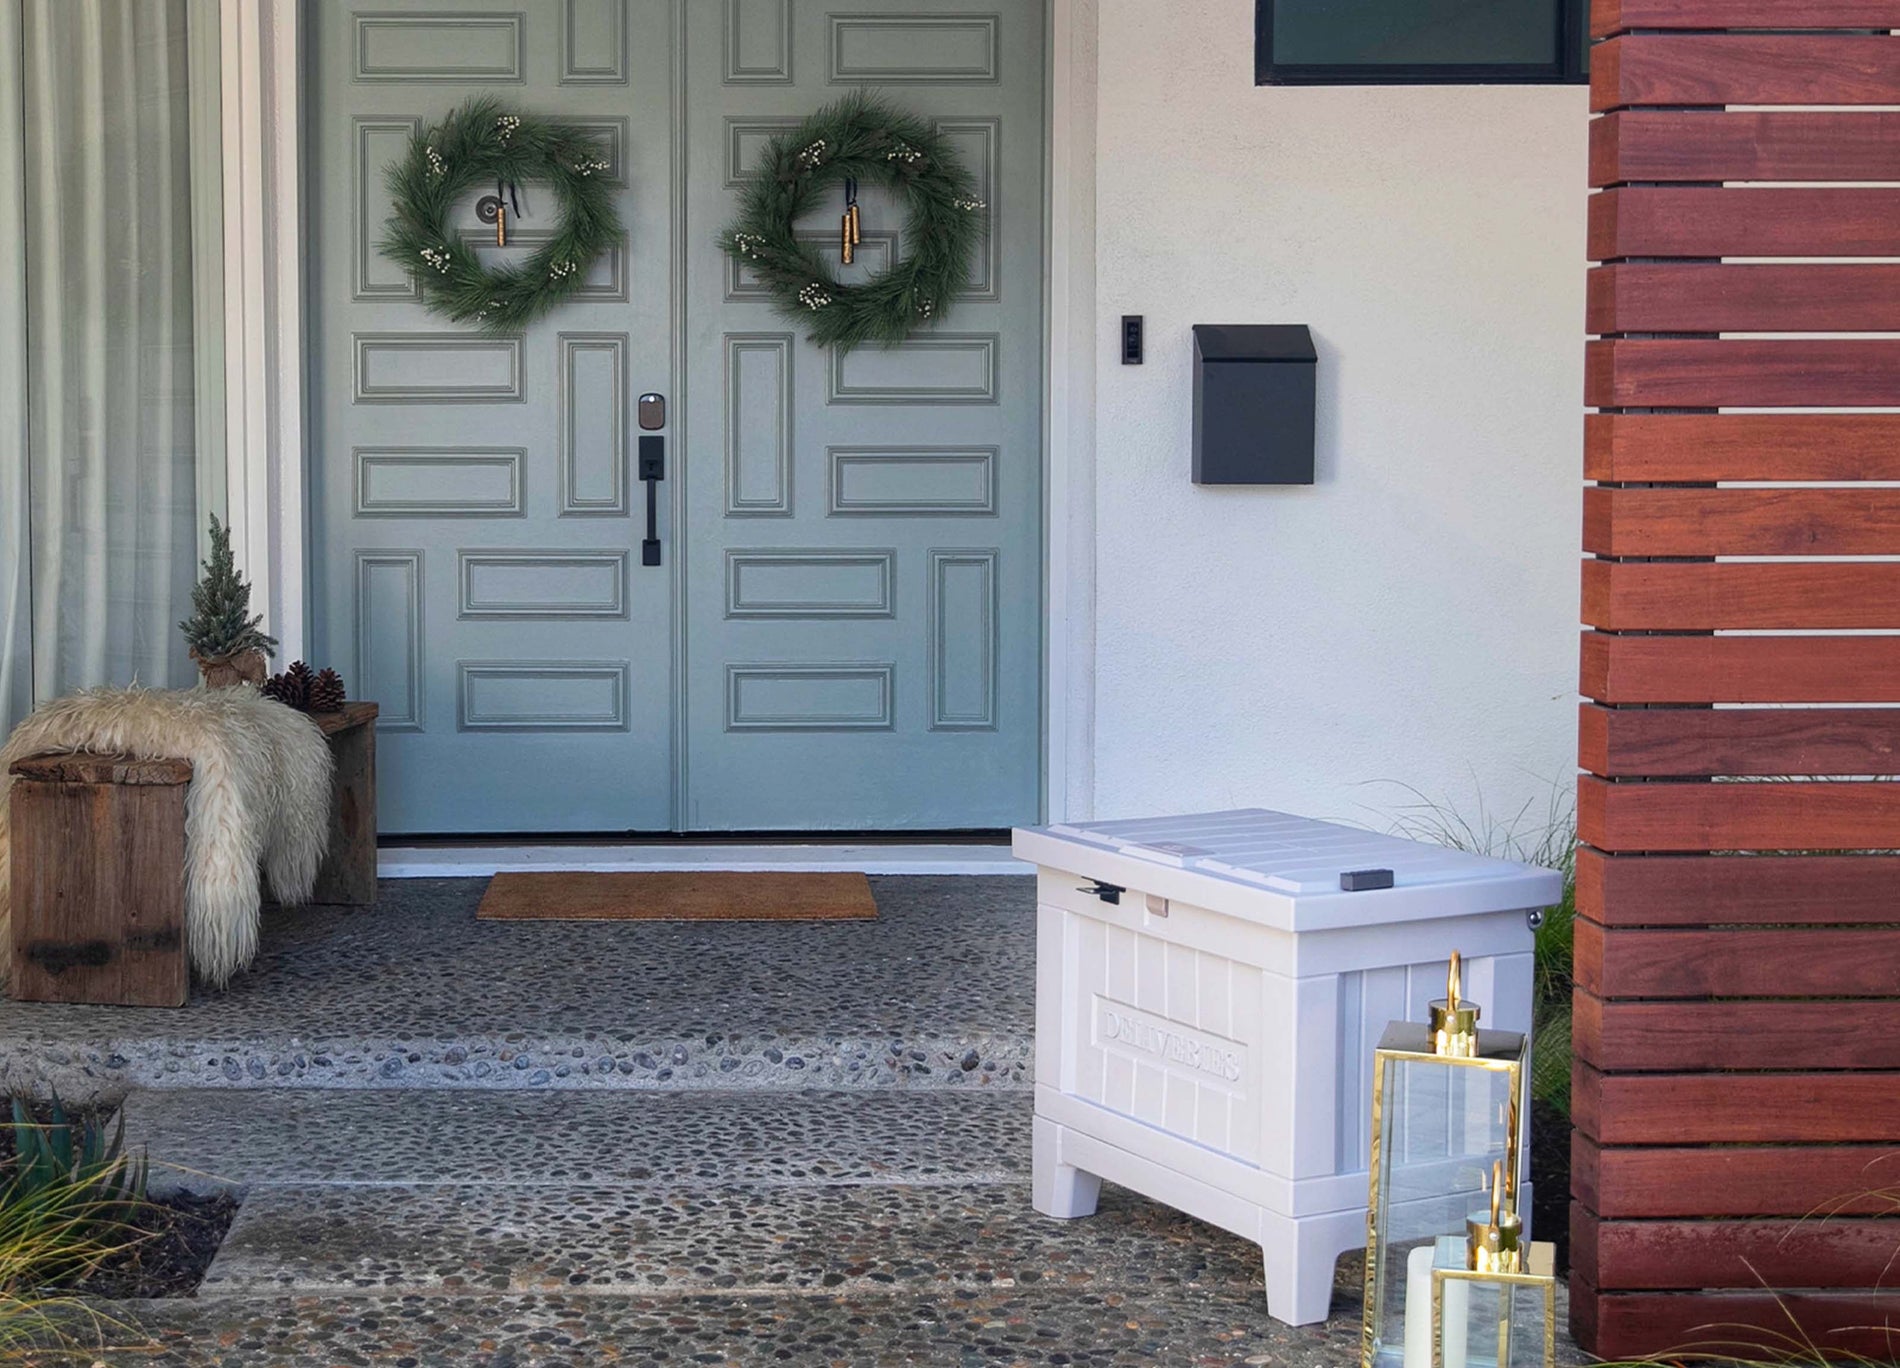 Nest x Yale delivery box on porch showing weather protection for belongings